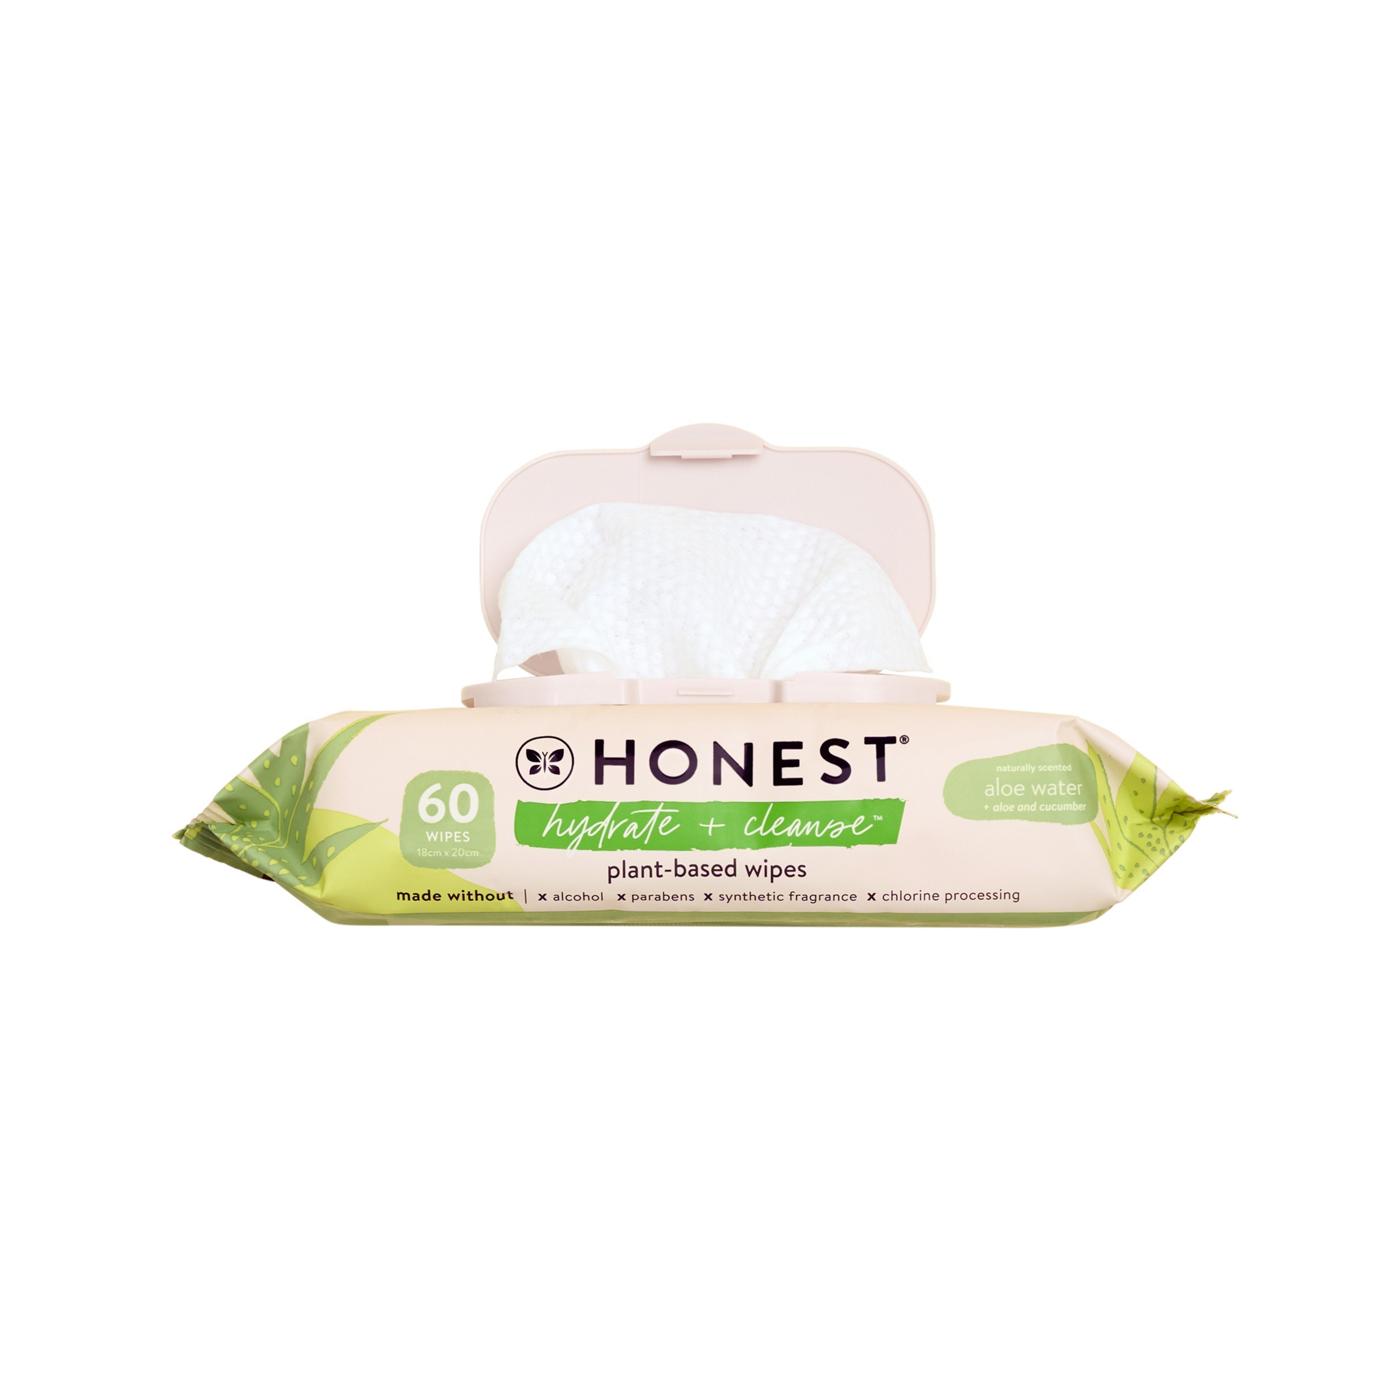 The Honest Company Nourish & Cleanse Baby Wipes; image 4 of 4